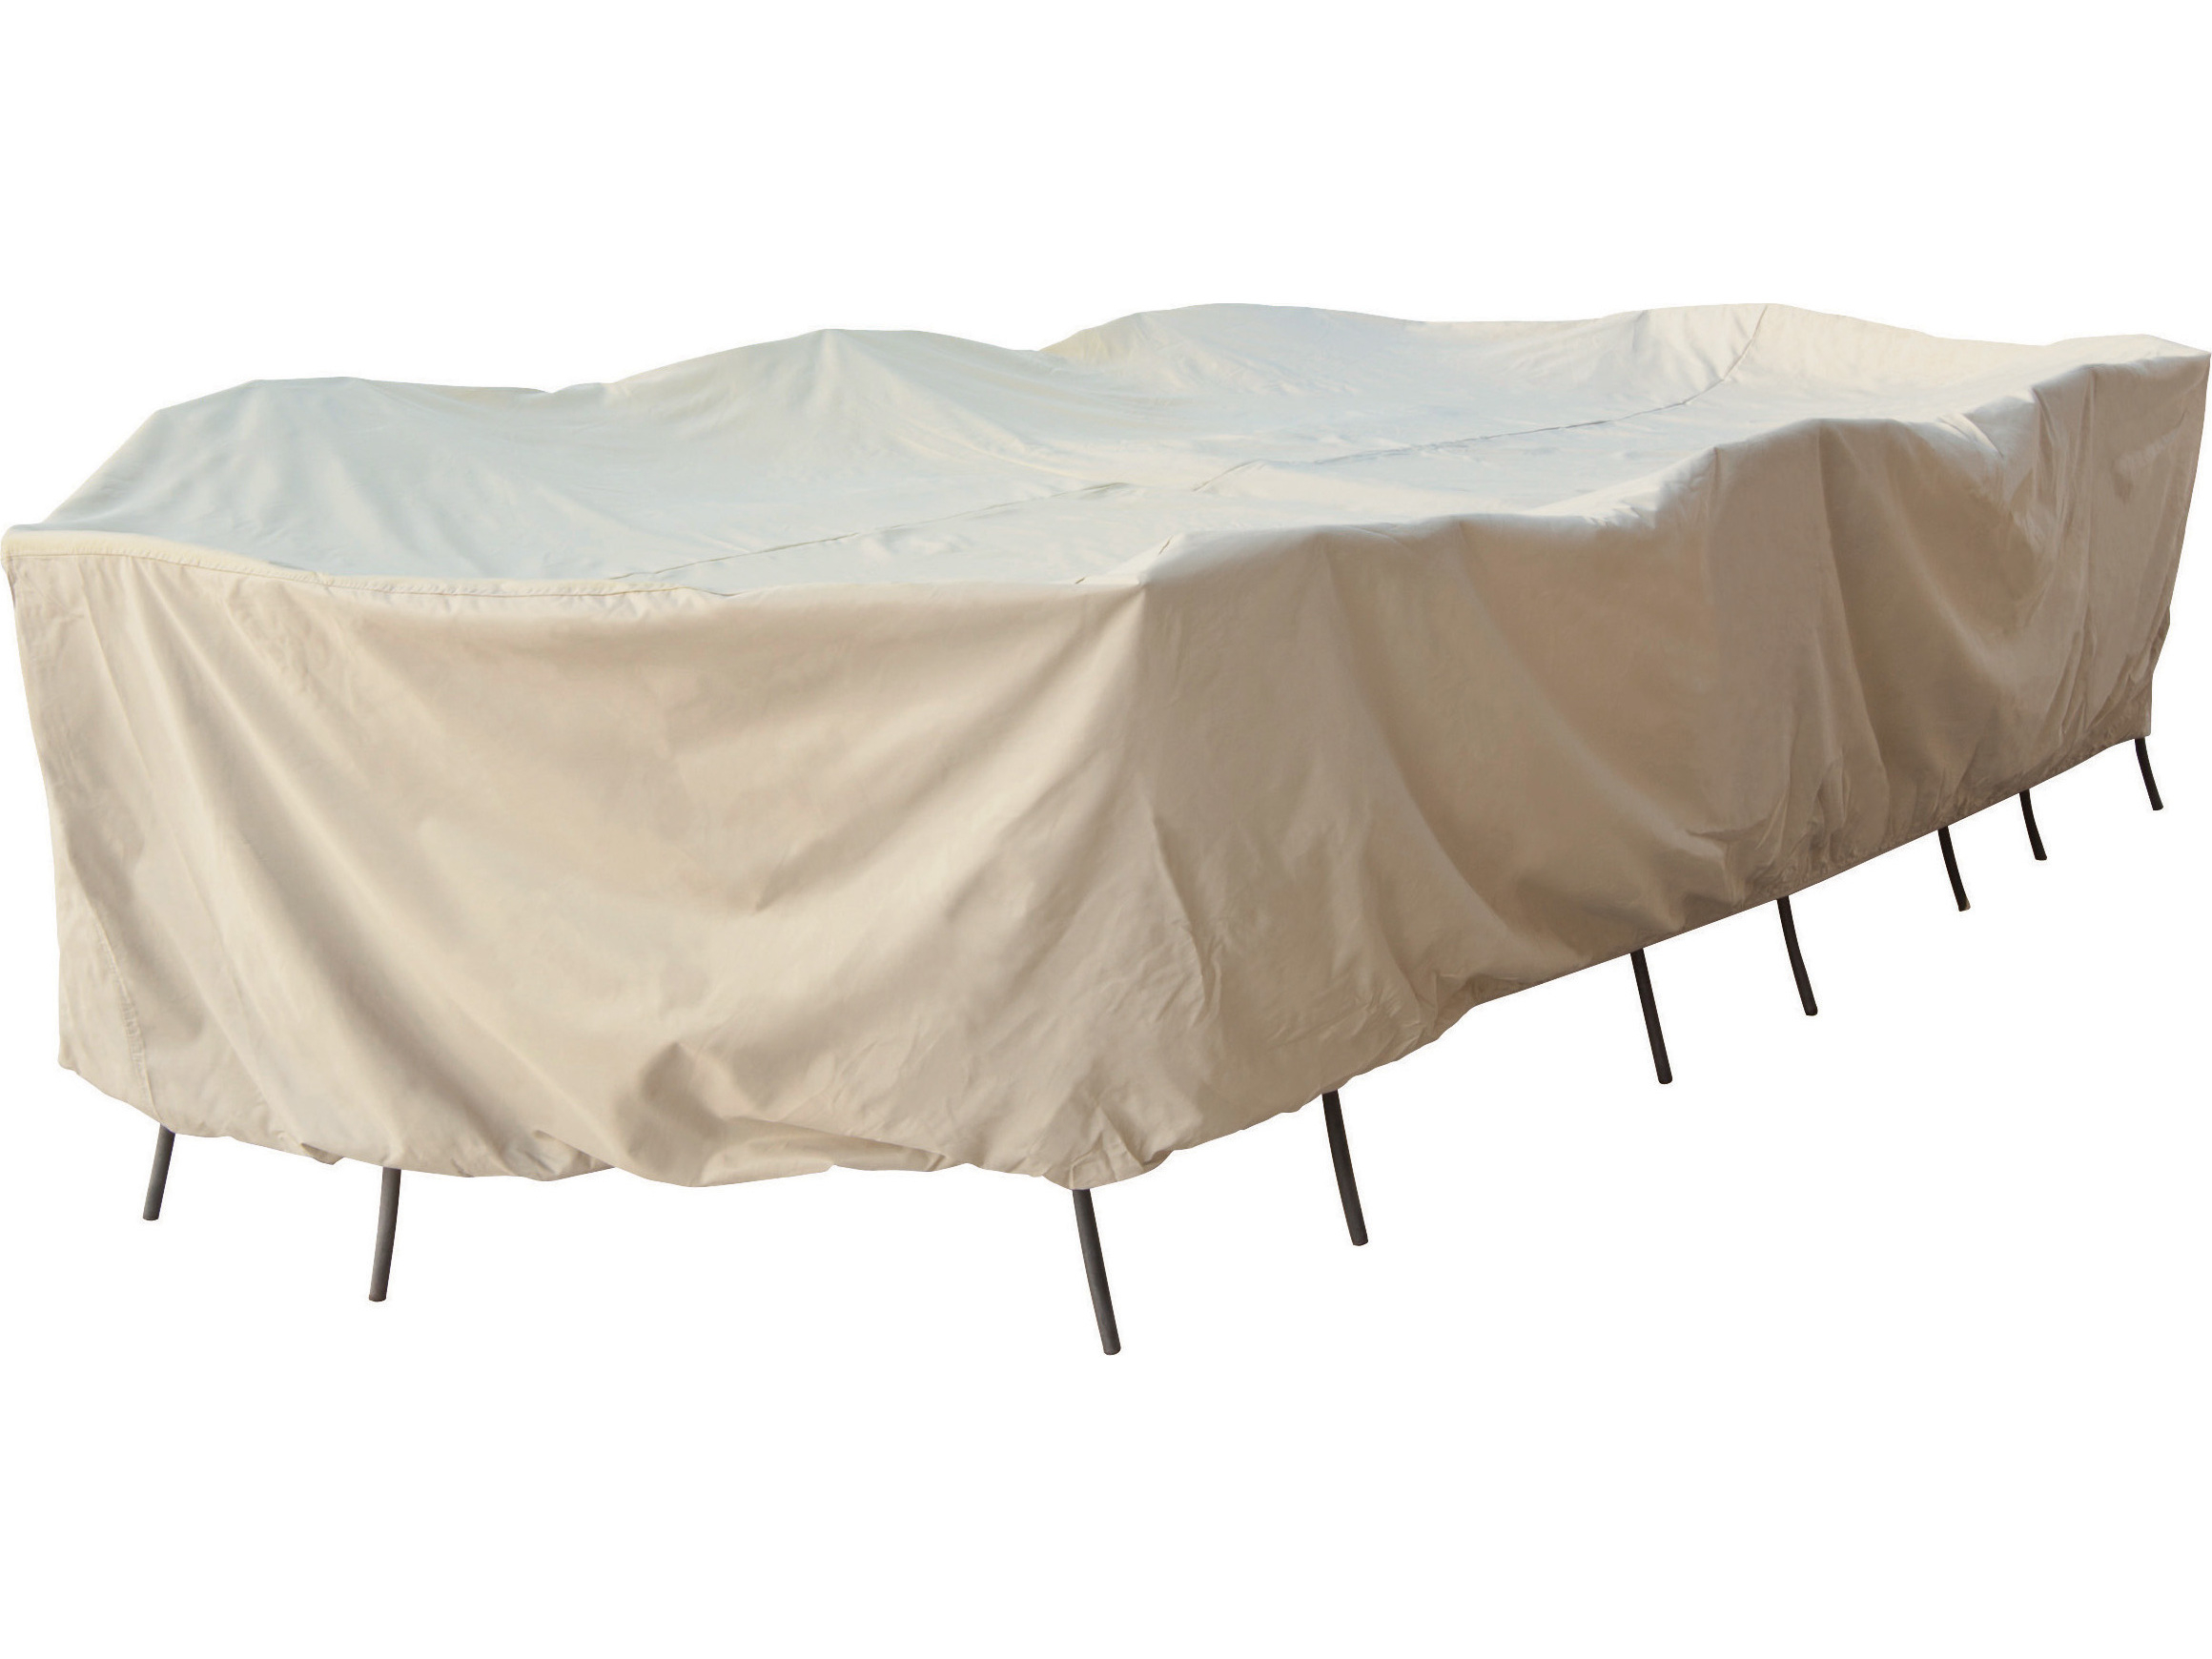 Treasure Garden 2xl Large Oval Rectangle Table And Chairs Cover within dimensions 2320 X 1740